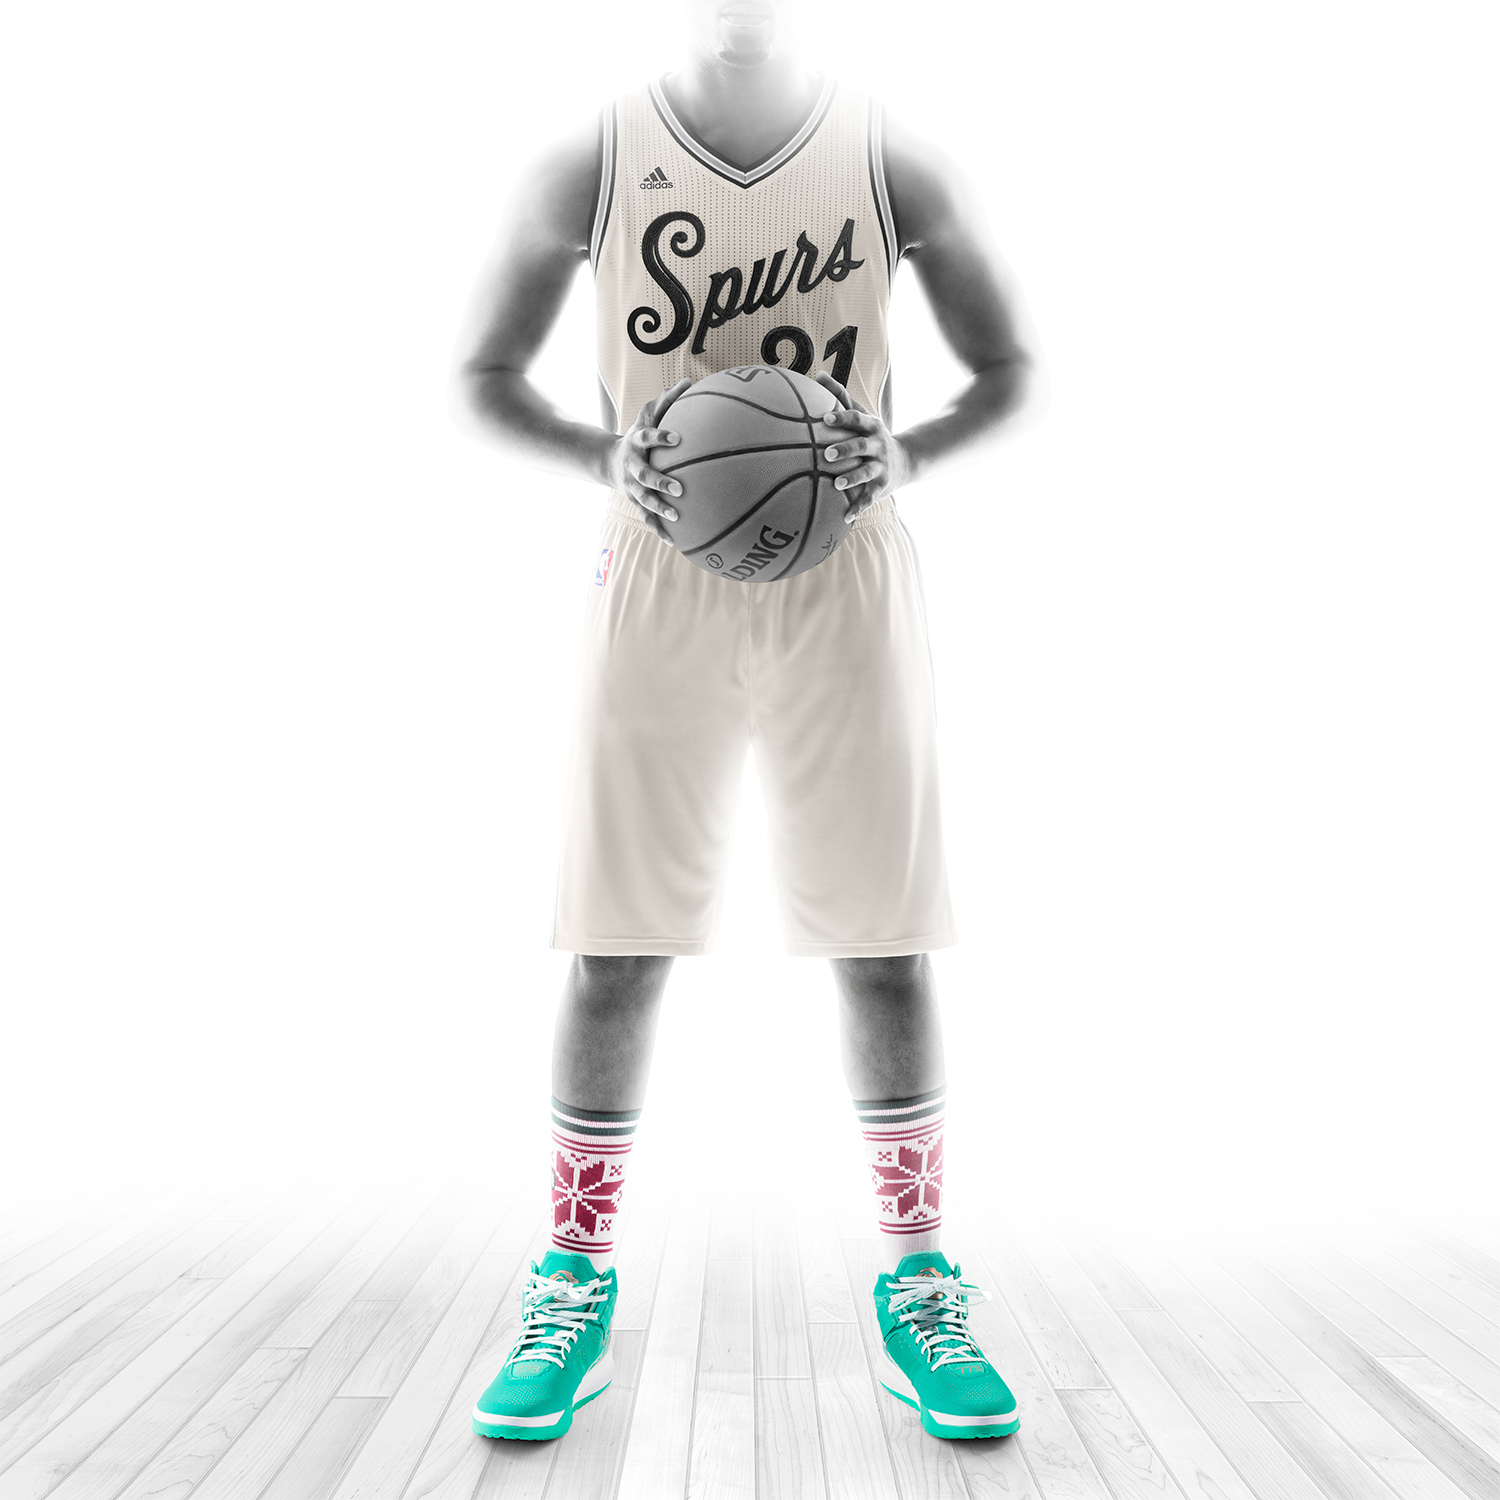 The NBA and adidas Unveil the 2015 NBA Christmas Day Games Uniforms -  Pursuit Of Dopeness